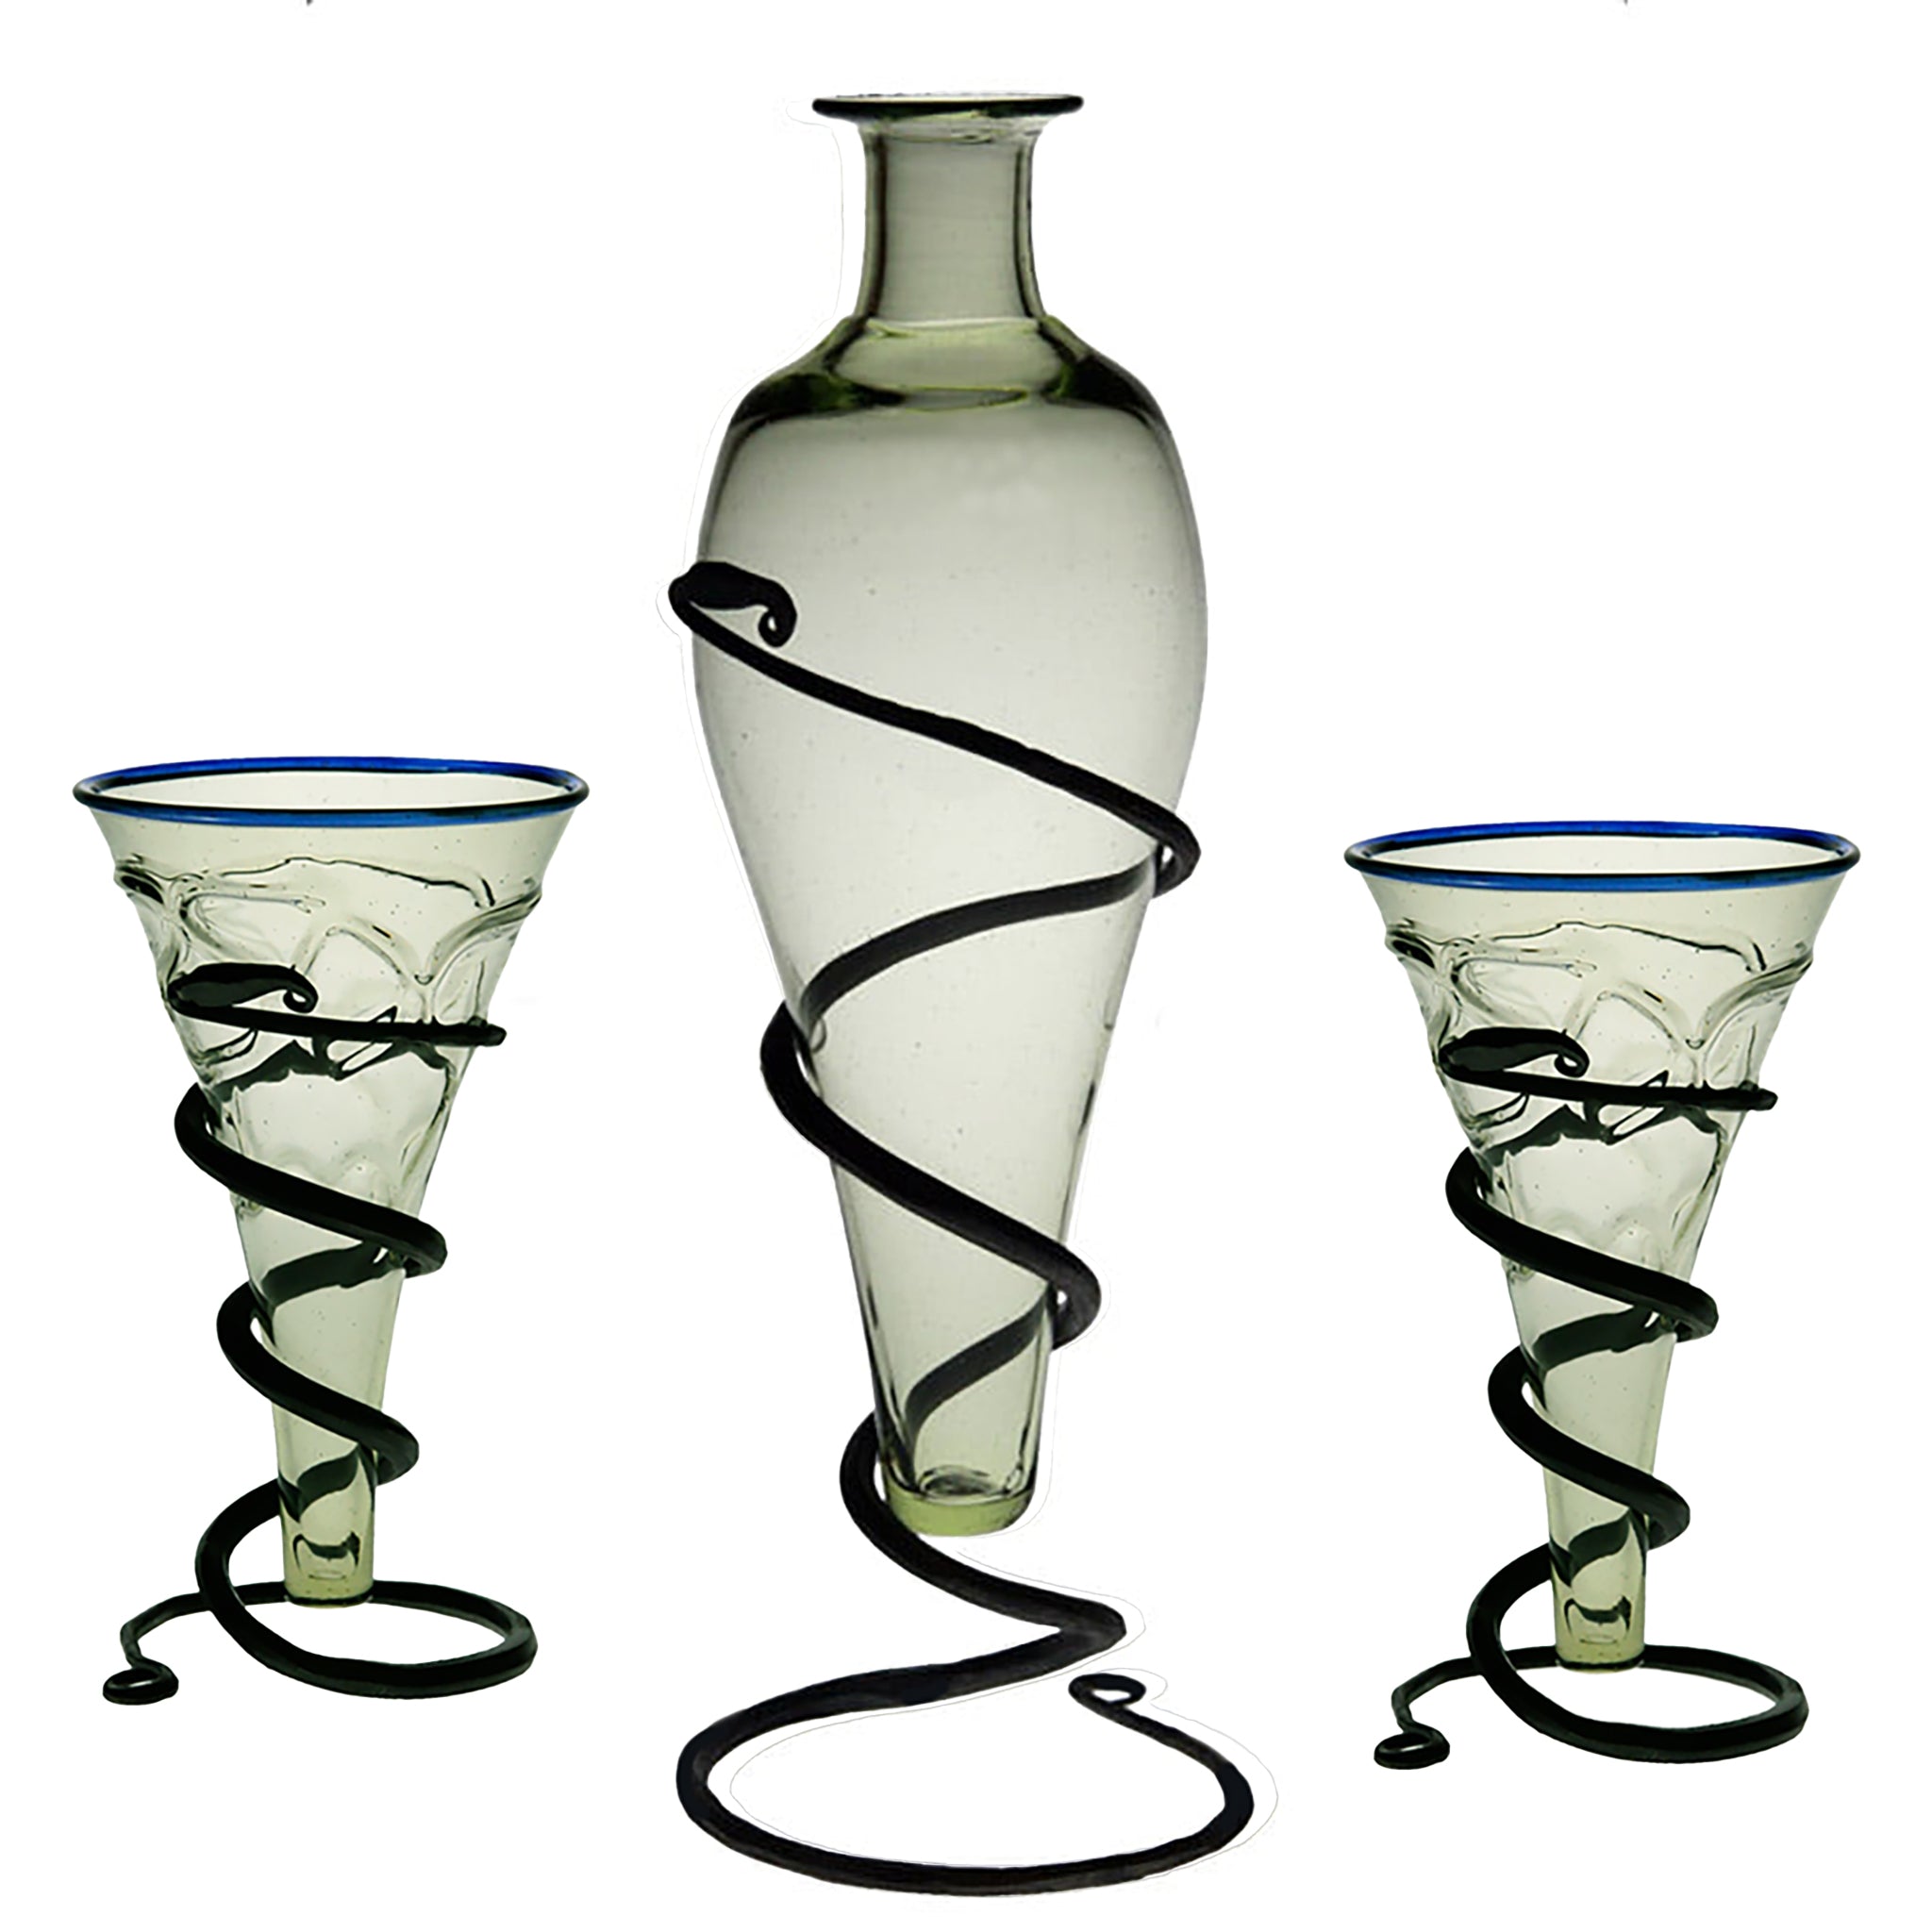 Handmade Glass Mead bottle on iron stand with 2 x Decorated, Blue-Rimmed Viking Cone Glasses